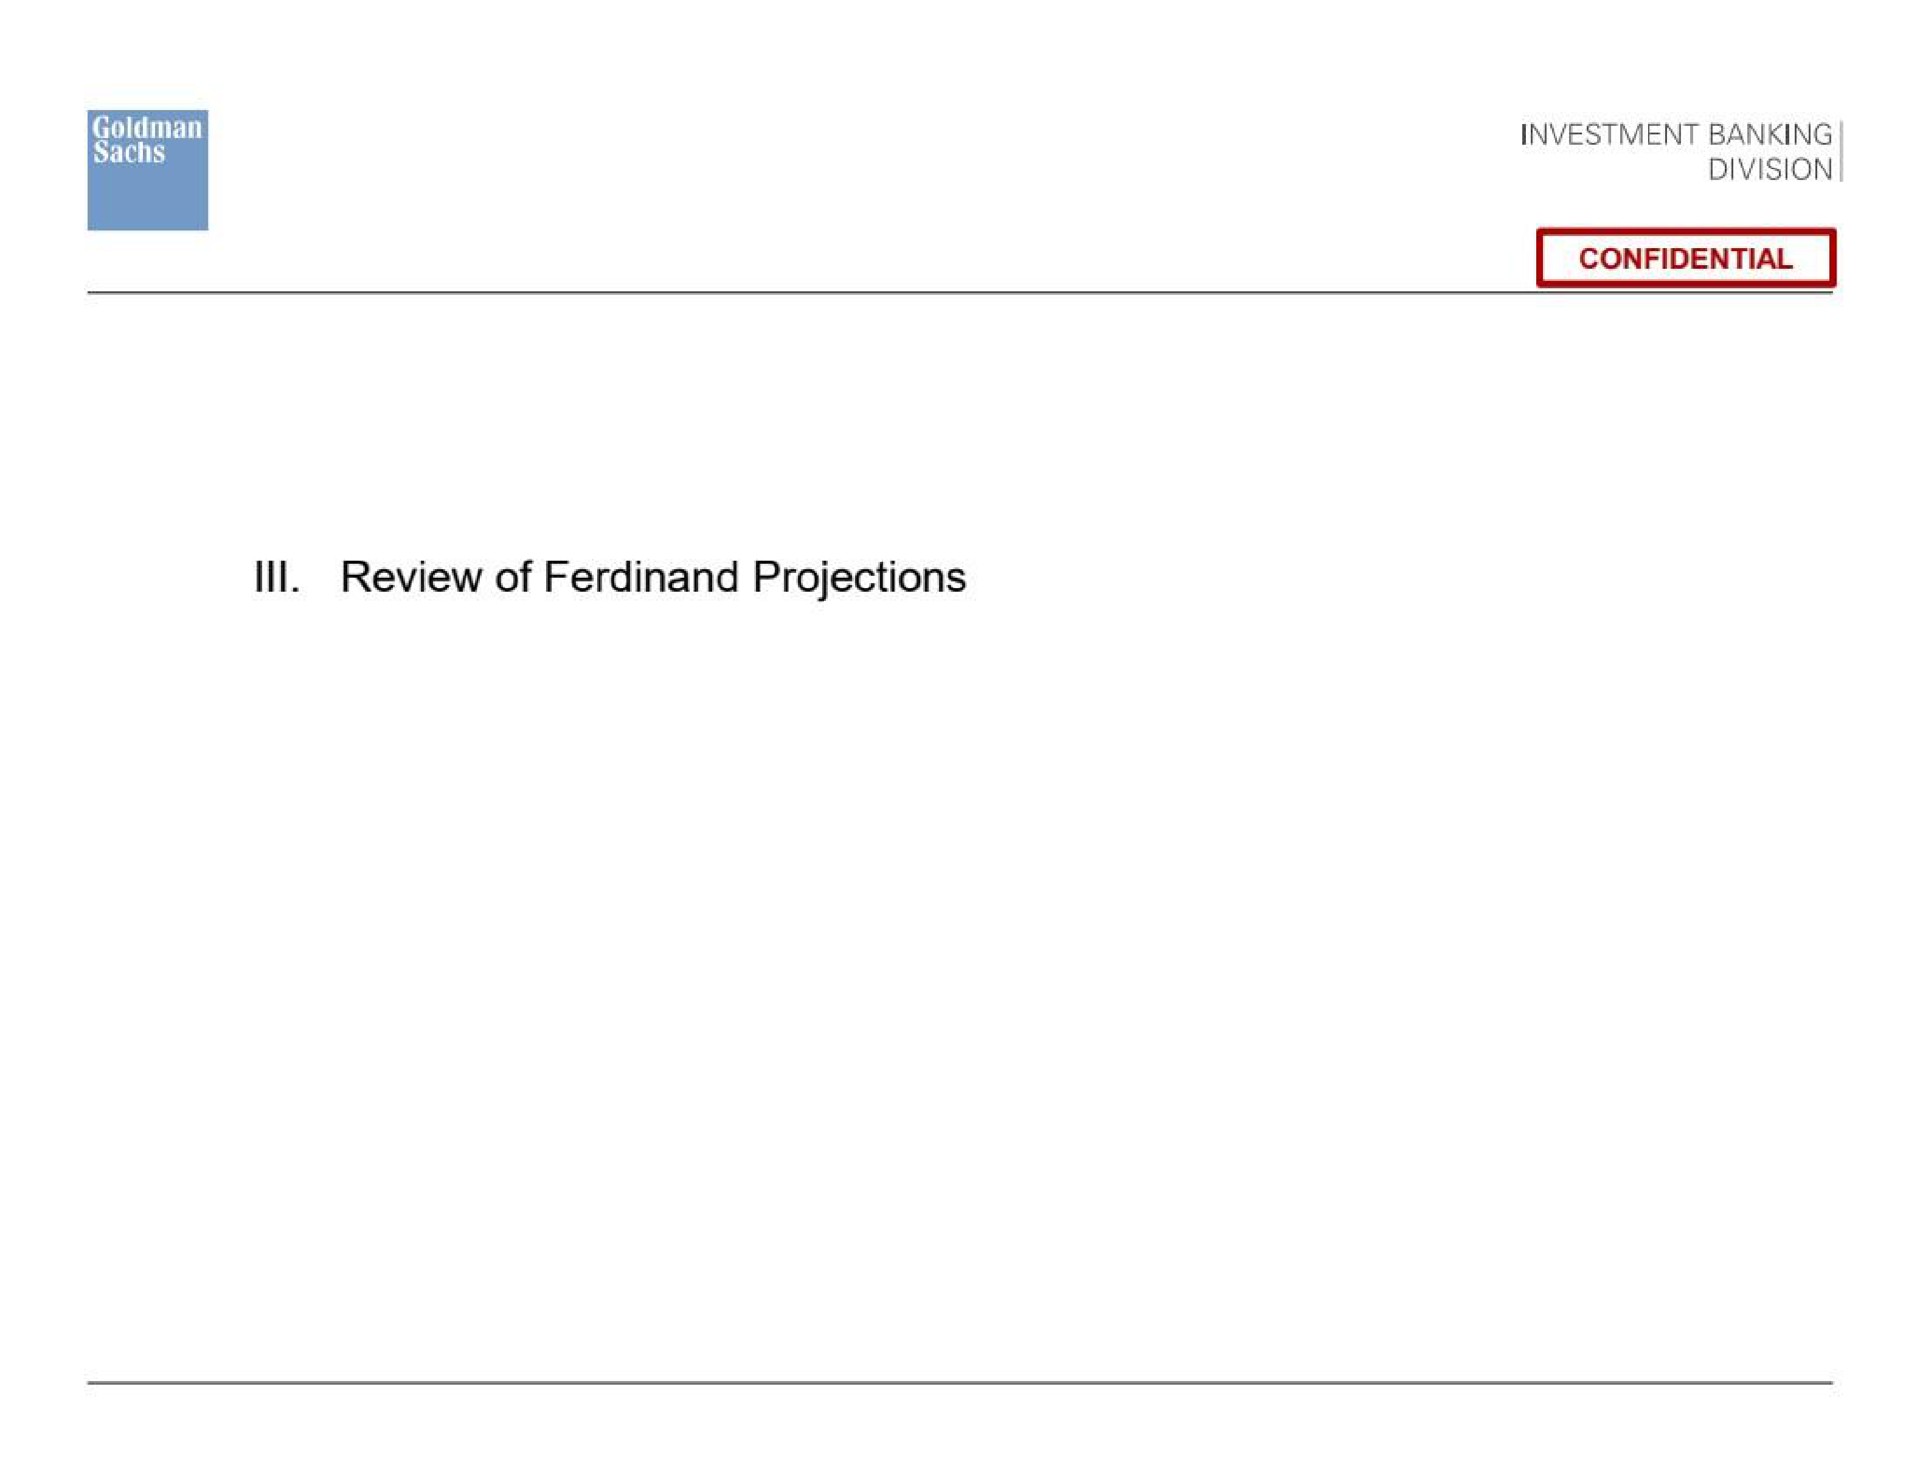 ill review of projections | Goldman Sachs